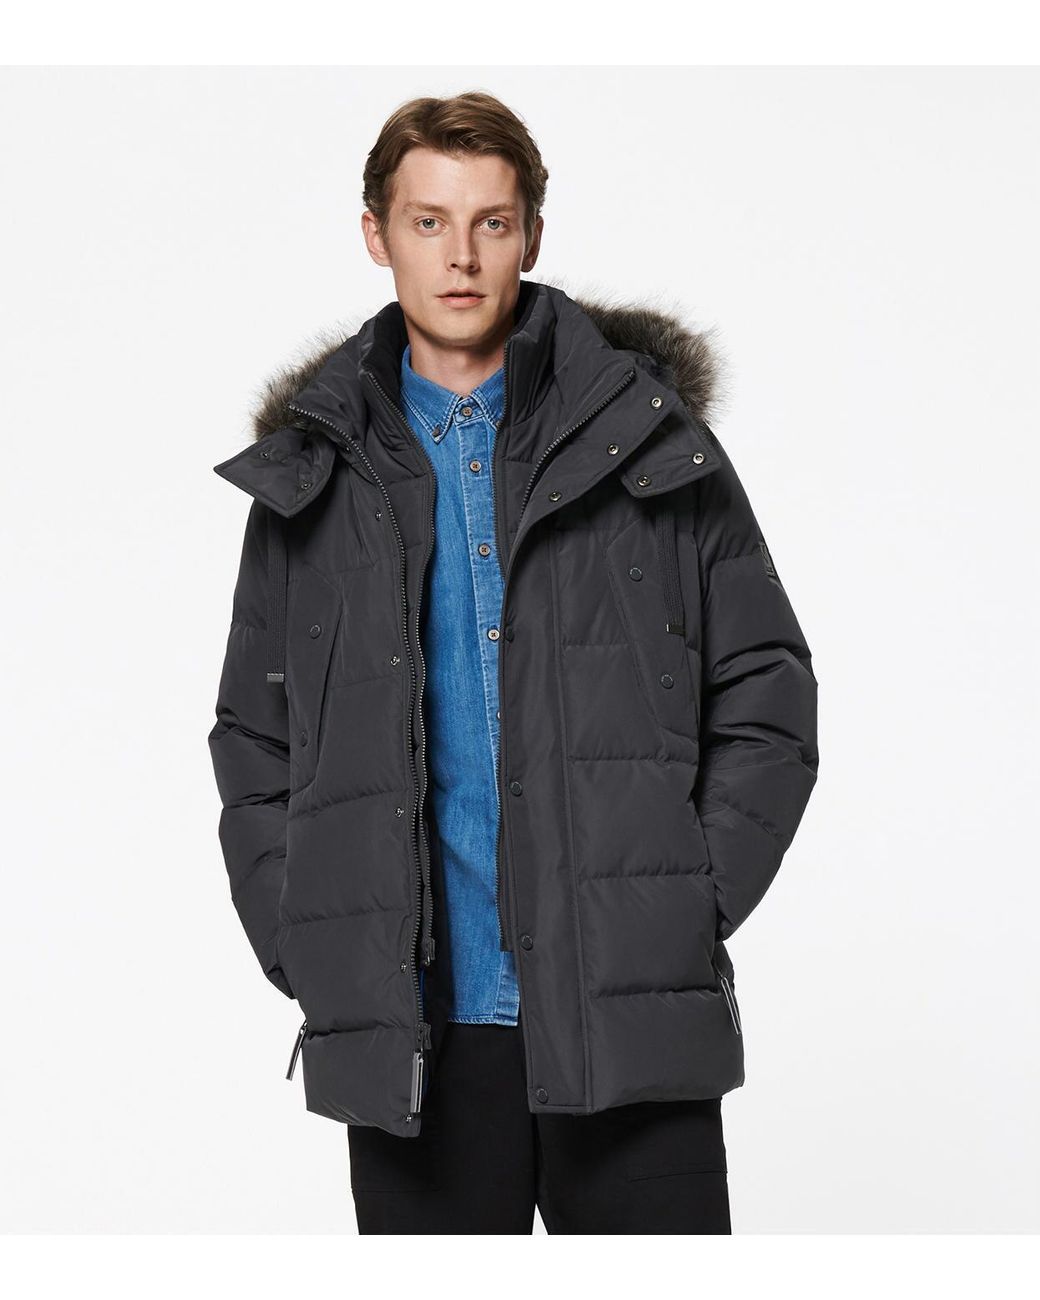 Andrew Marc Gattaca Ripstop Parka in Charcoal (Gray) for Men - Lyst